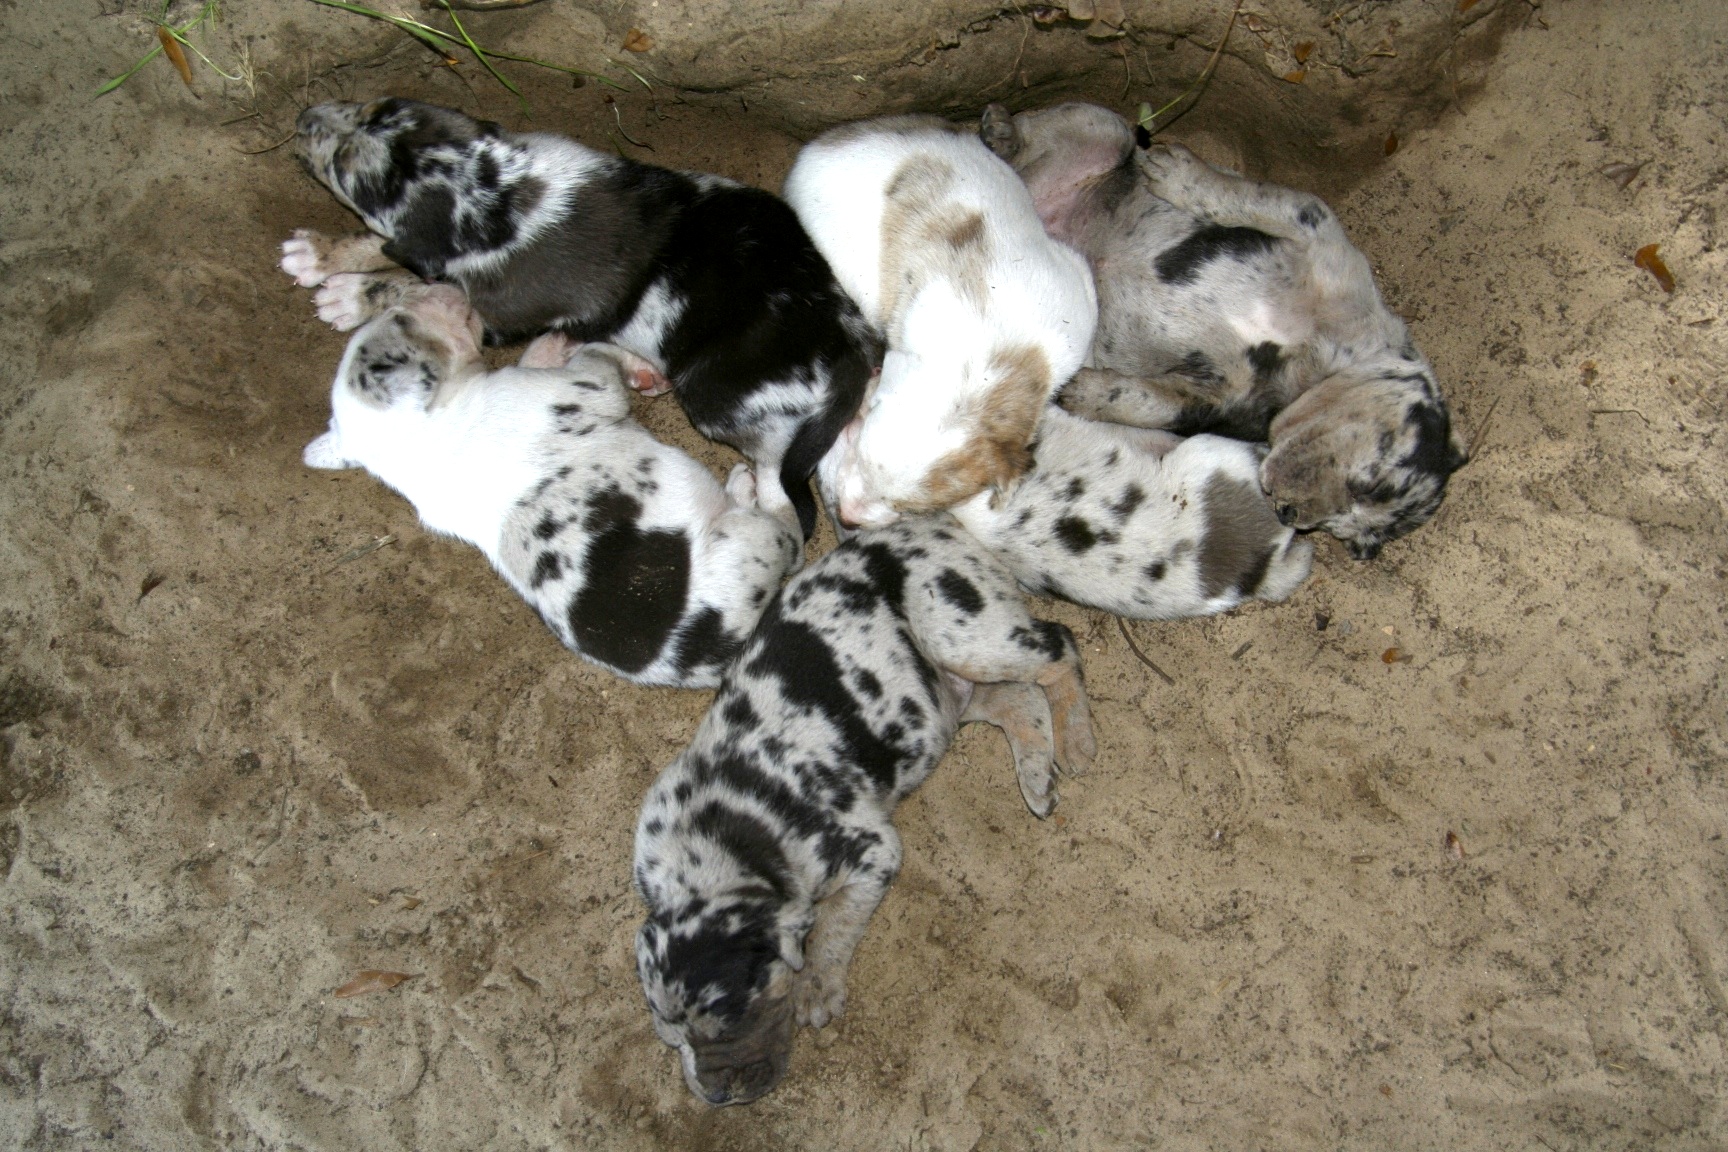 Even as a puppy Raven liked to lie on her back. She's in the top right corner of the litter.